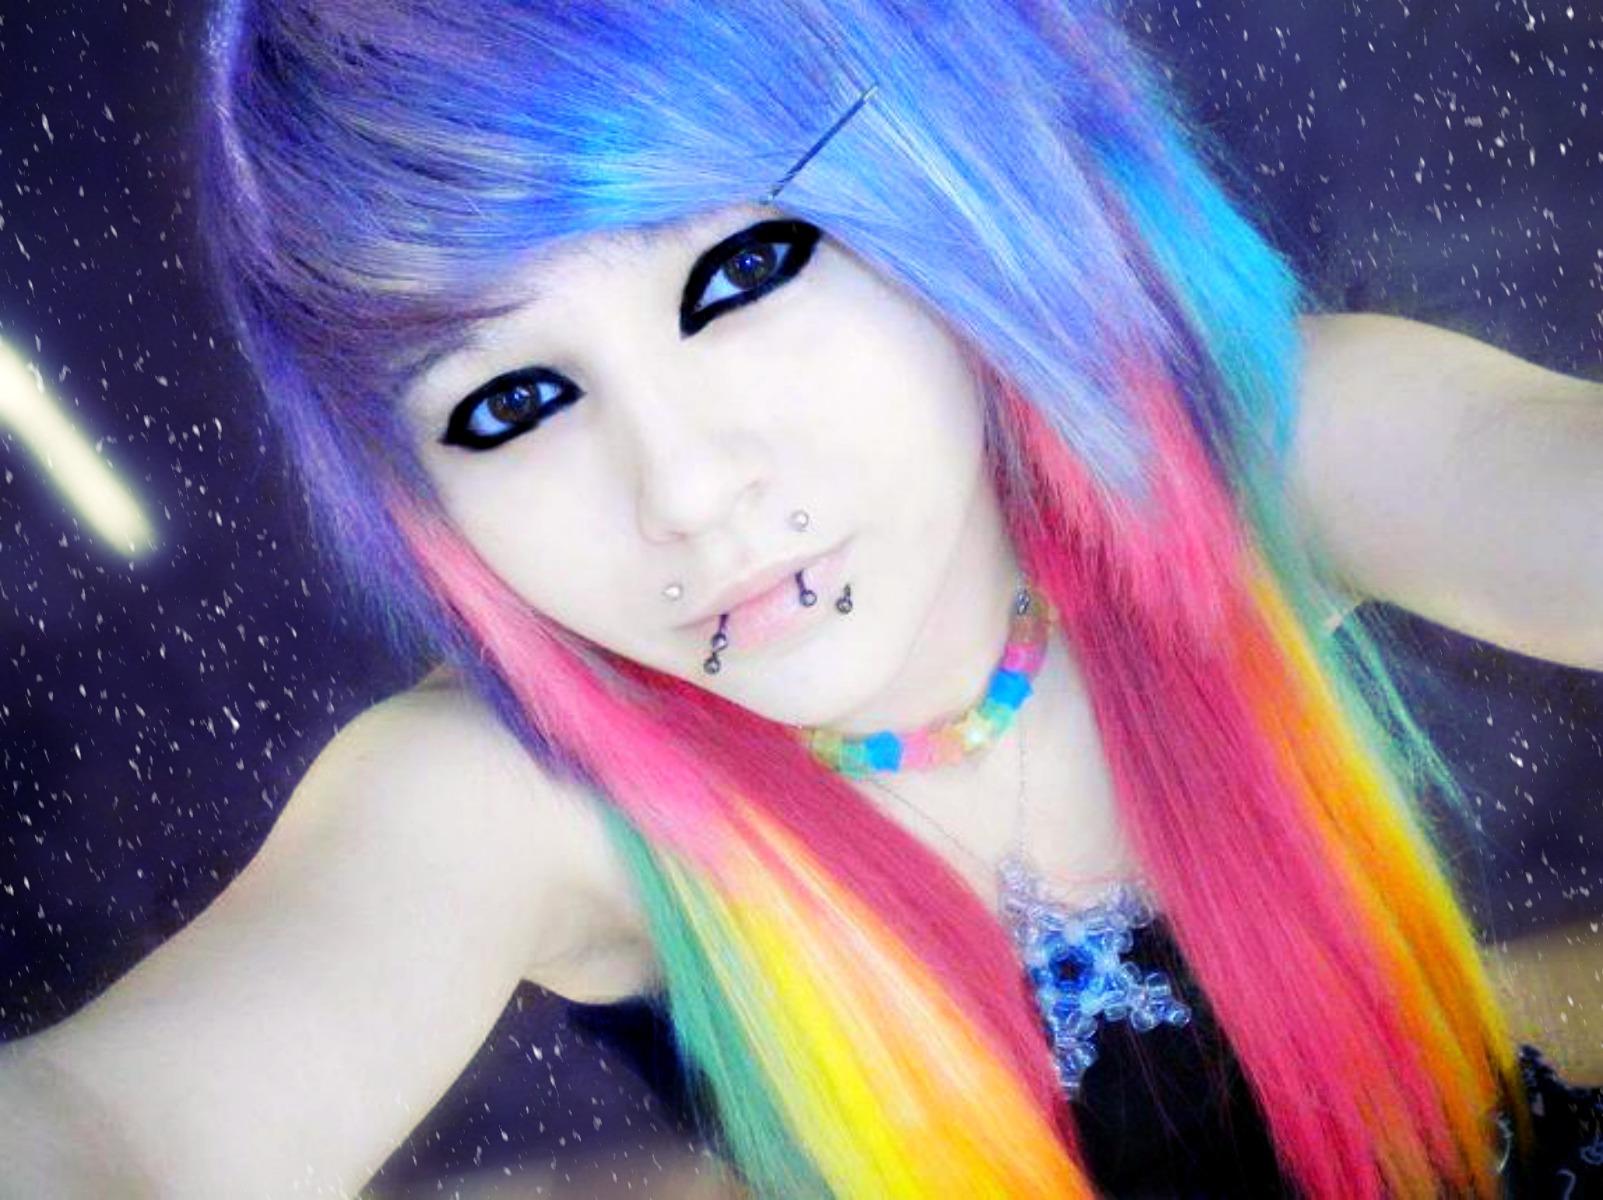 Cute emo scene girl - (#89341) - High Quality and Resolution ...